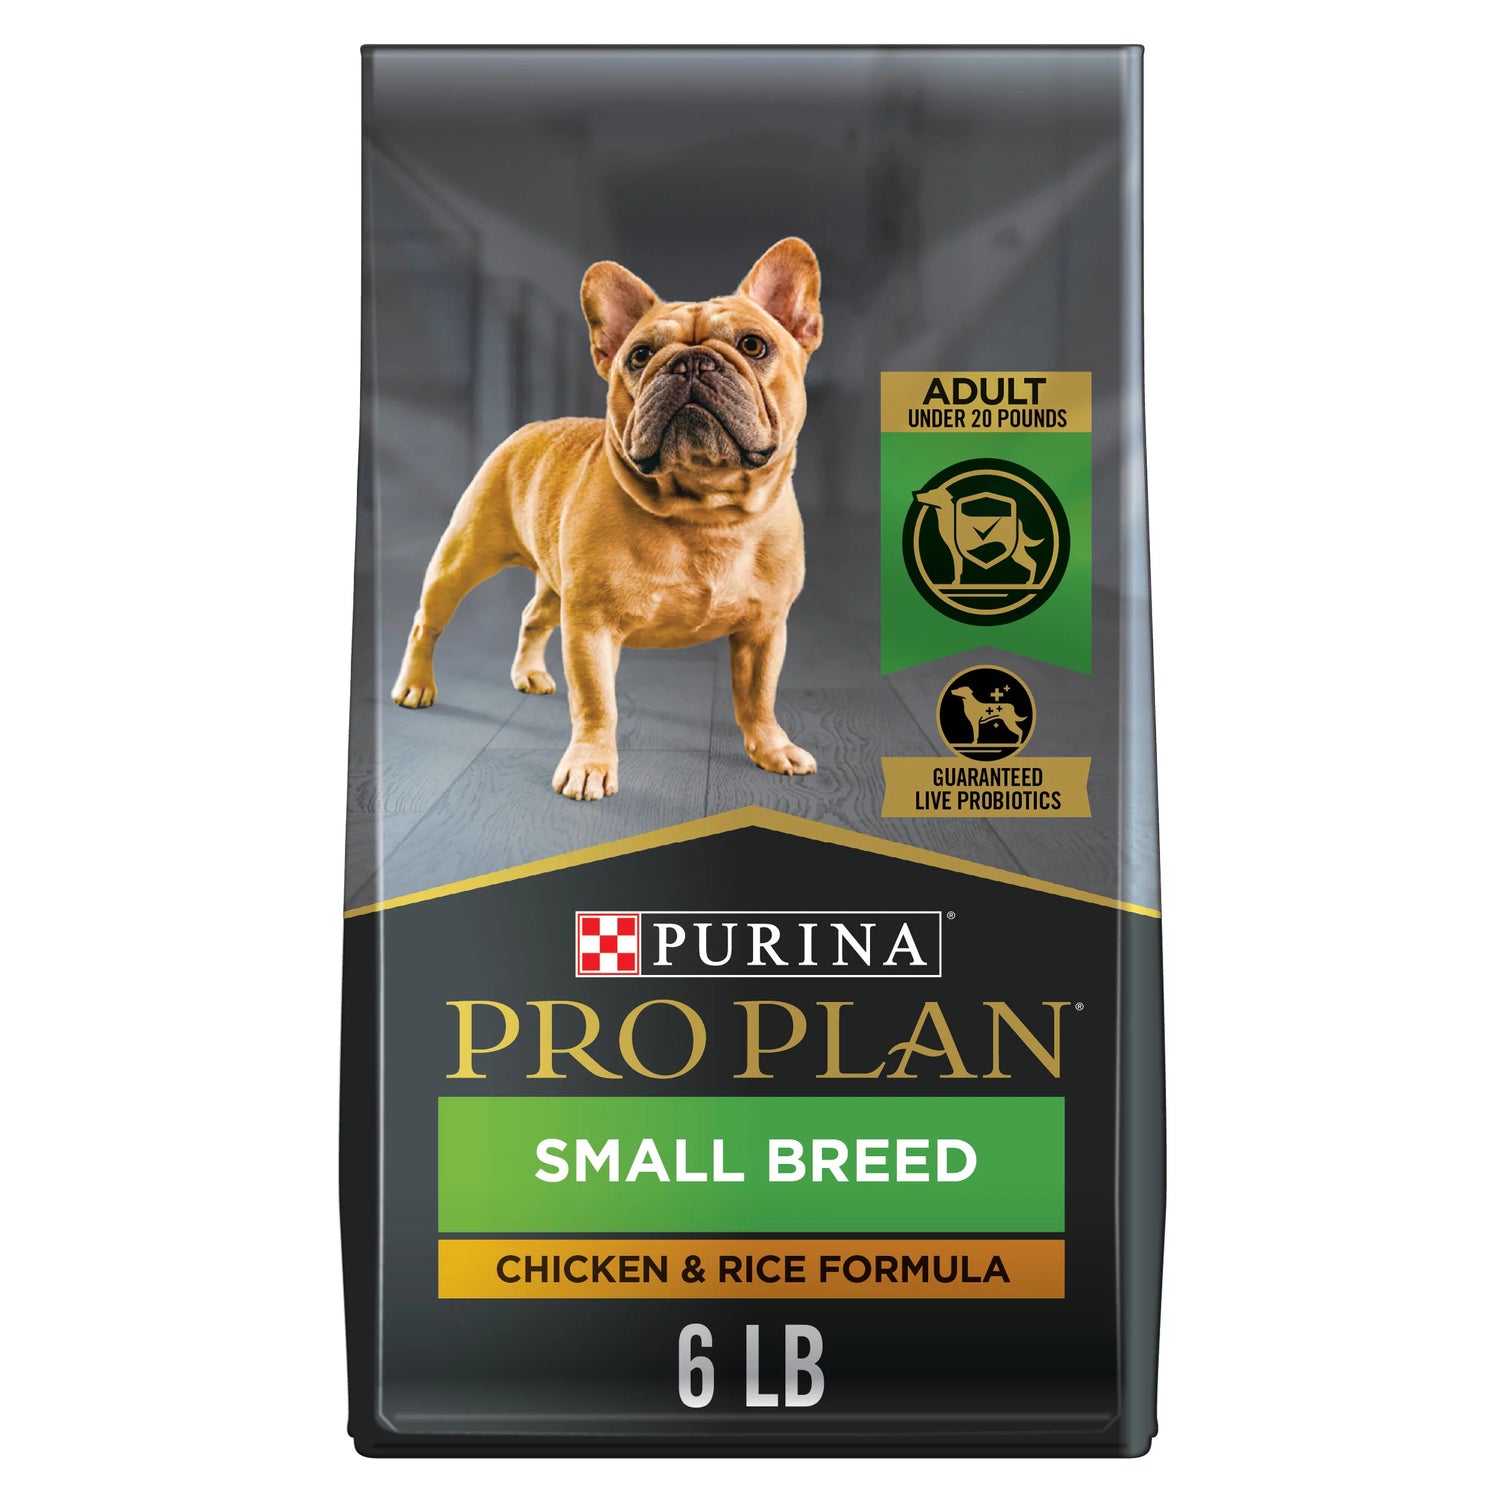 Purina Pro Plan High Protein Small Breed Dog Food, Chicken & Rice Formula, 6 Lb. Bag